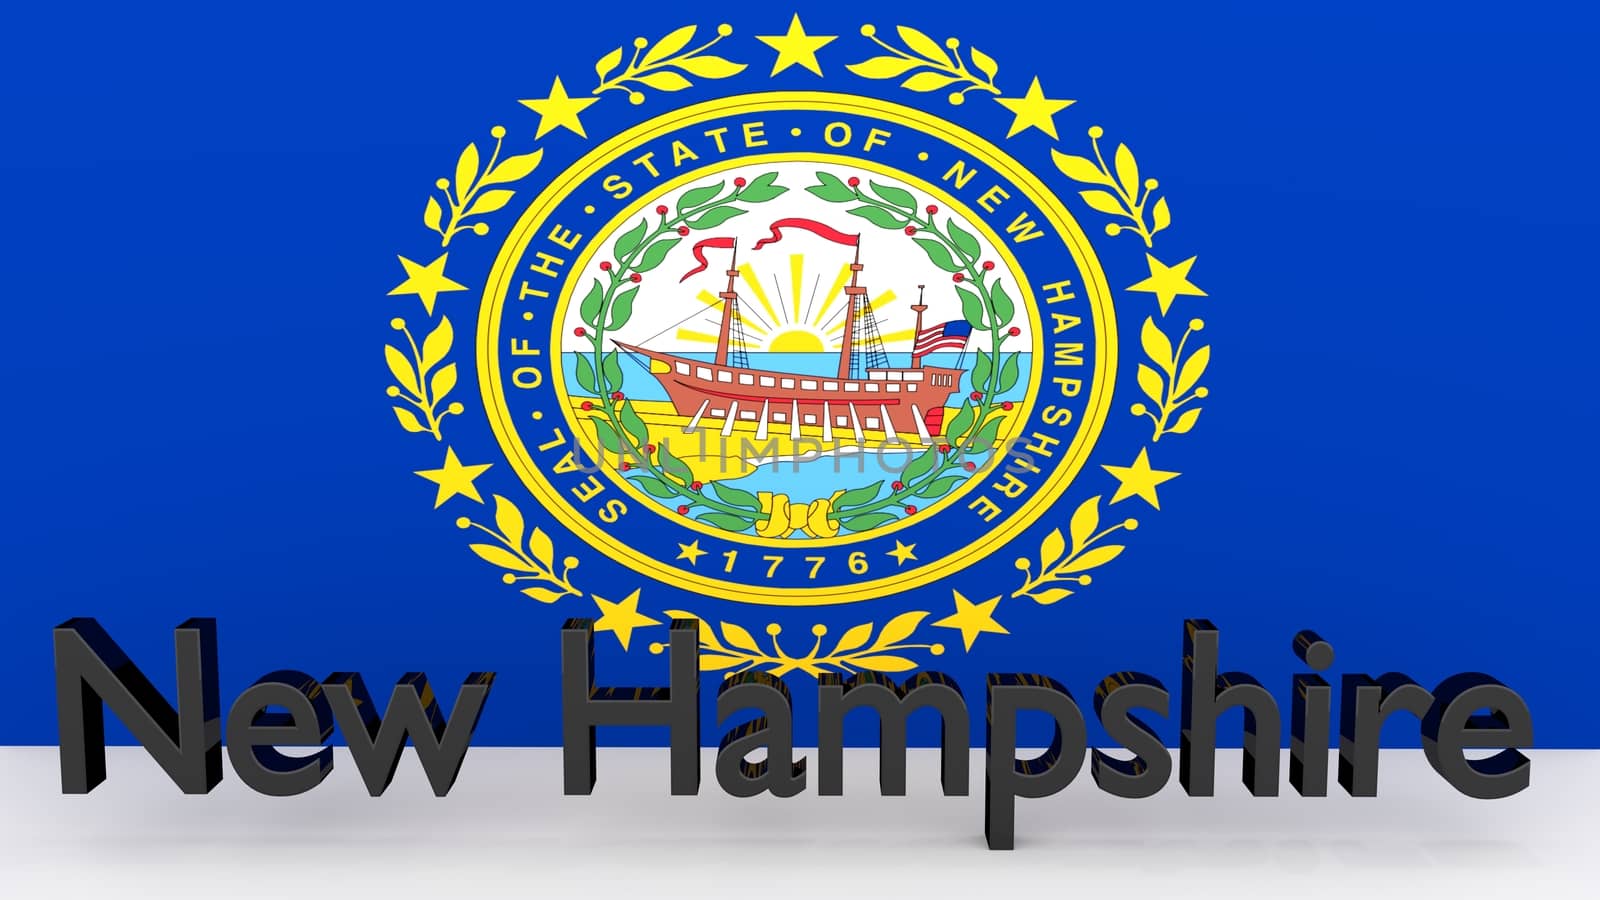 US state New Hampshire, metal name in front of flag by MarkDw